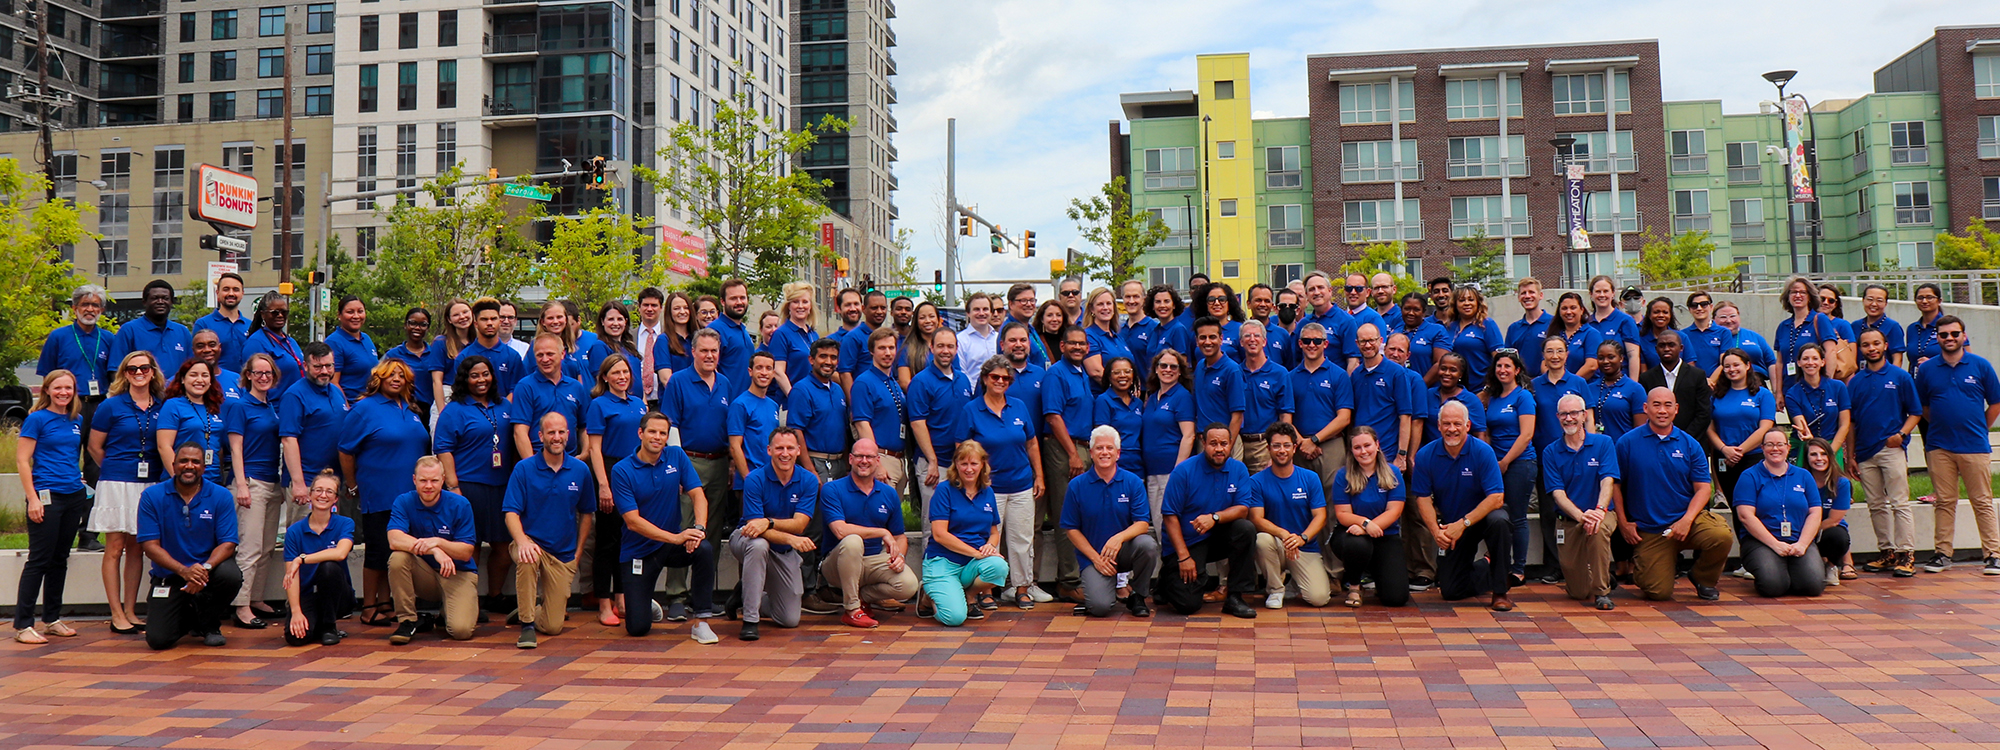 Group photo of Montgomery Plnning staff in blue Planning shirts